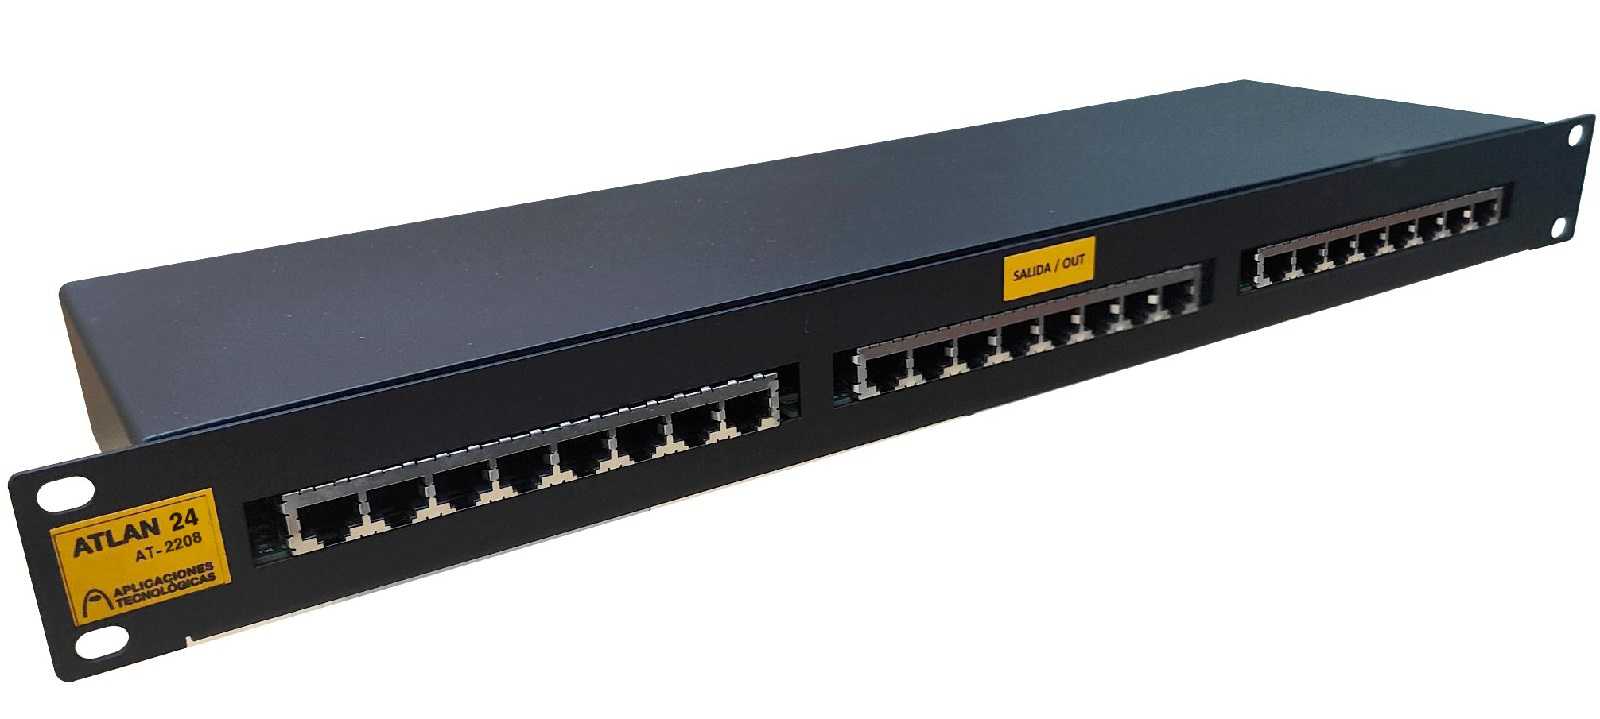 ATLAN 24 patch panel surge protector for 24 ports 1Gb Ethernet